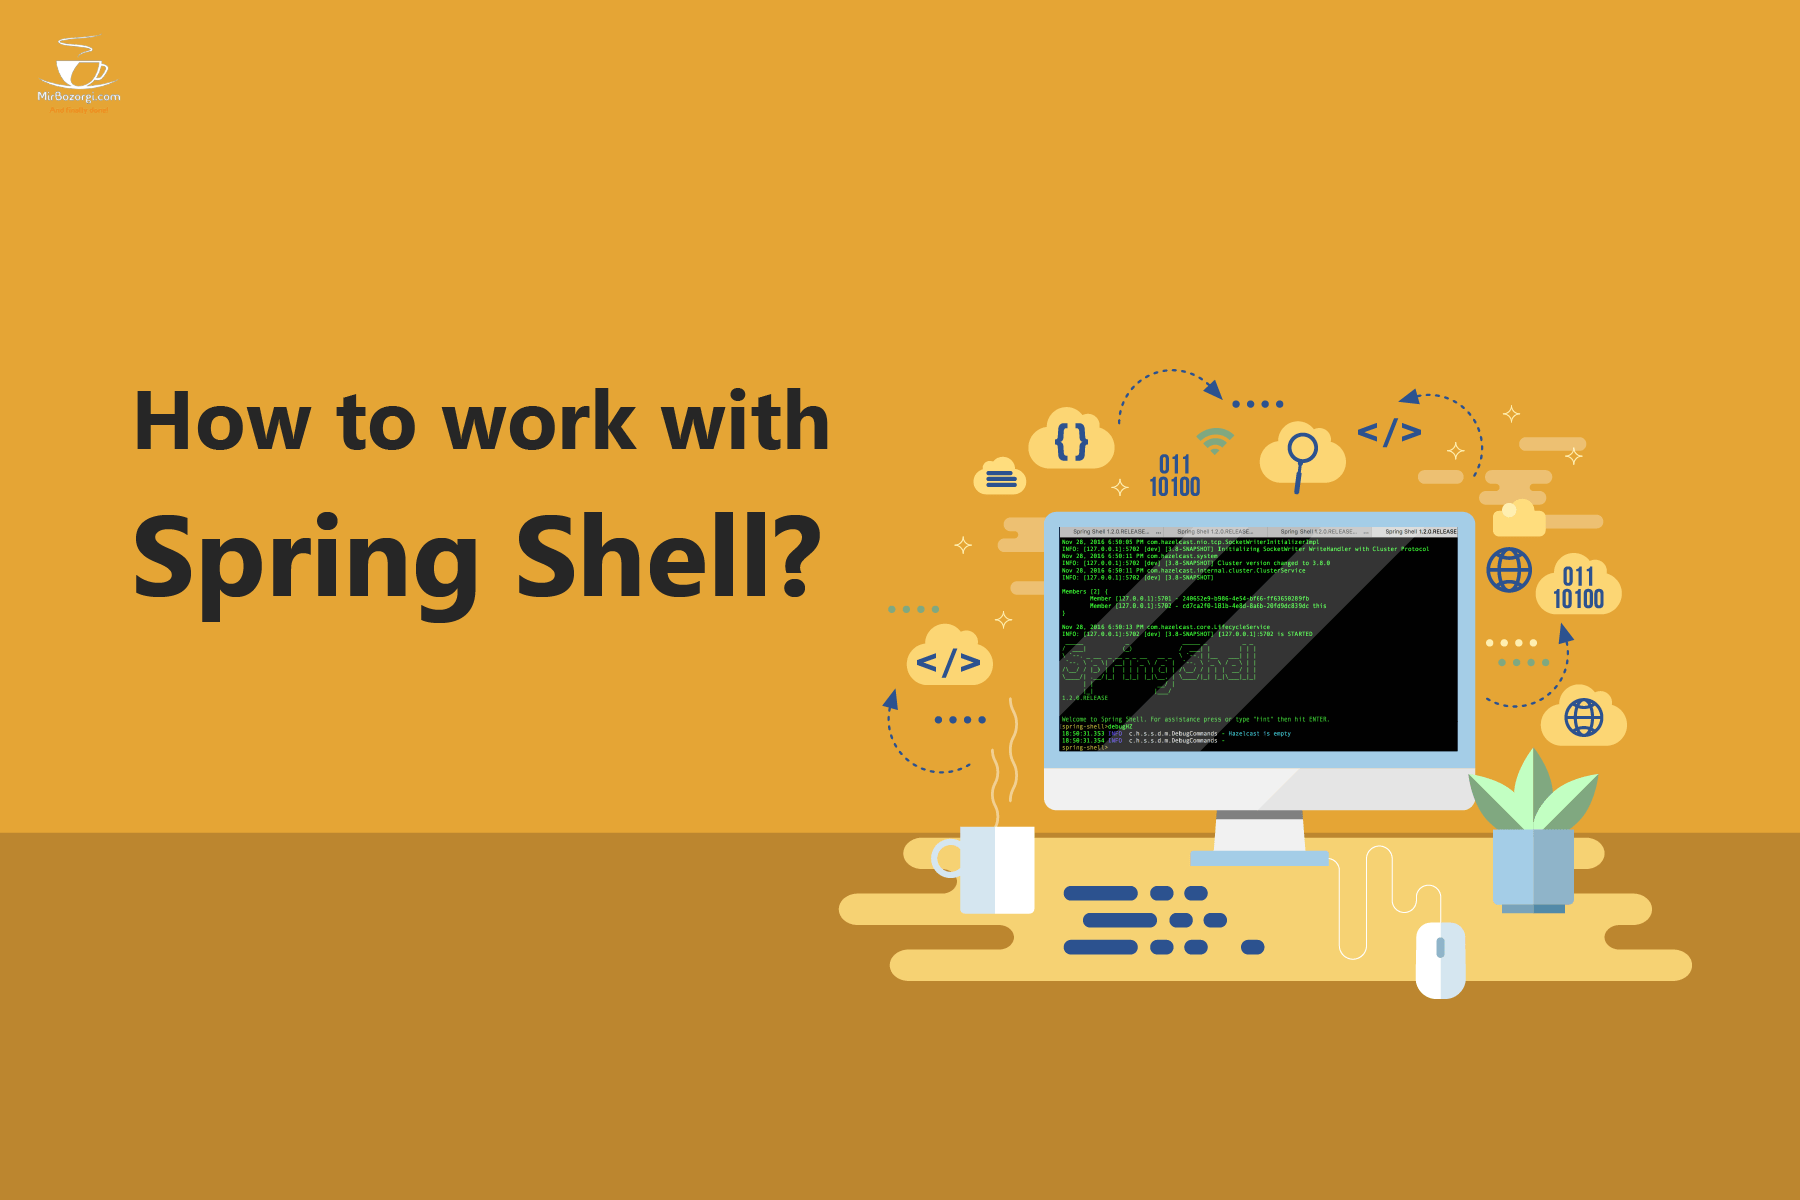 How to work with Spring Shell